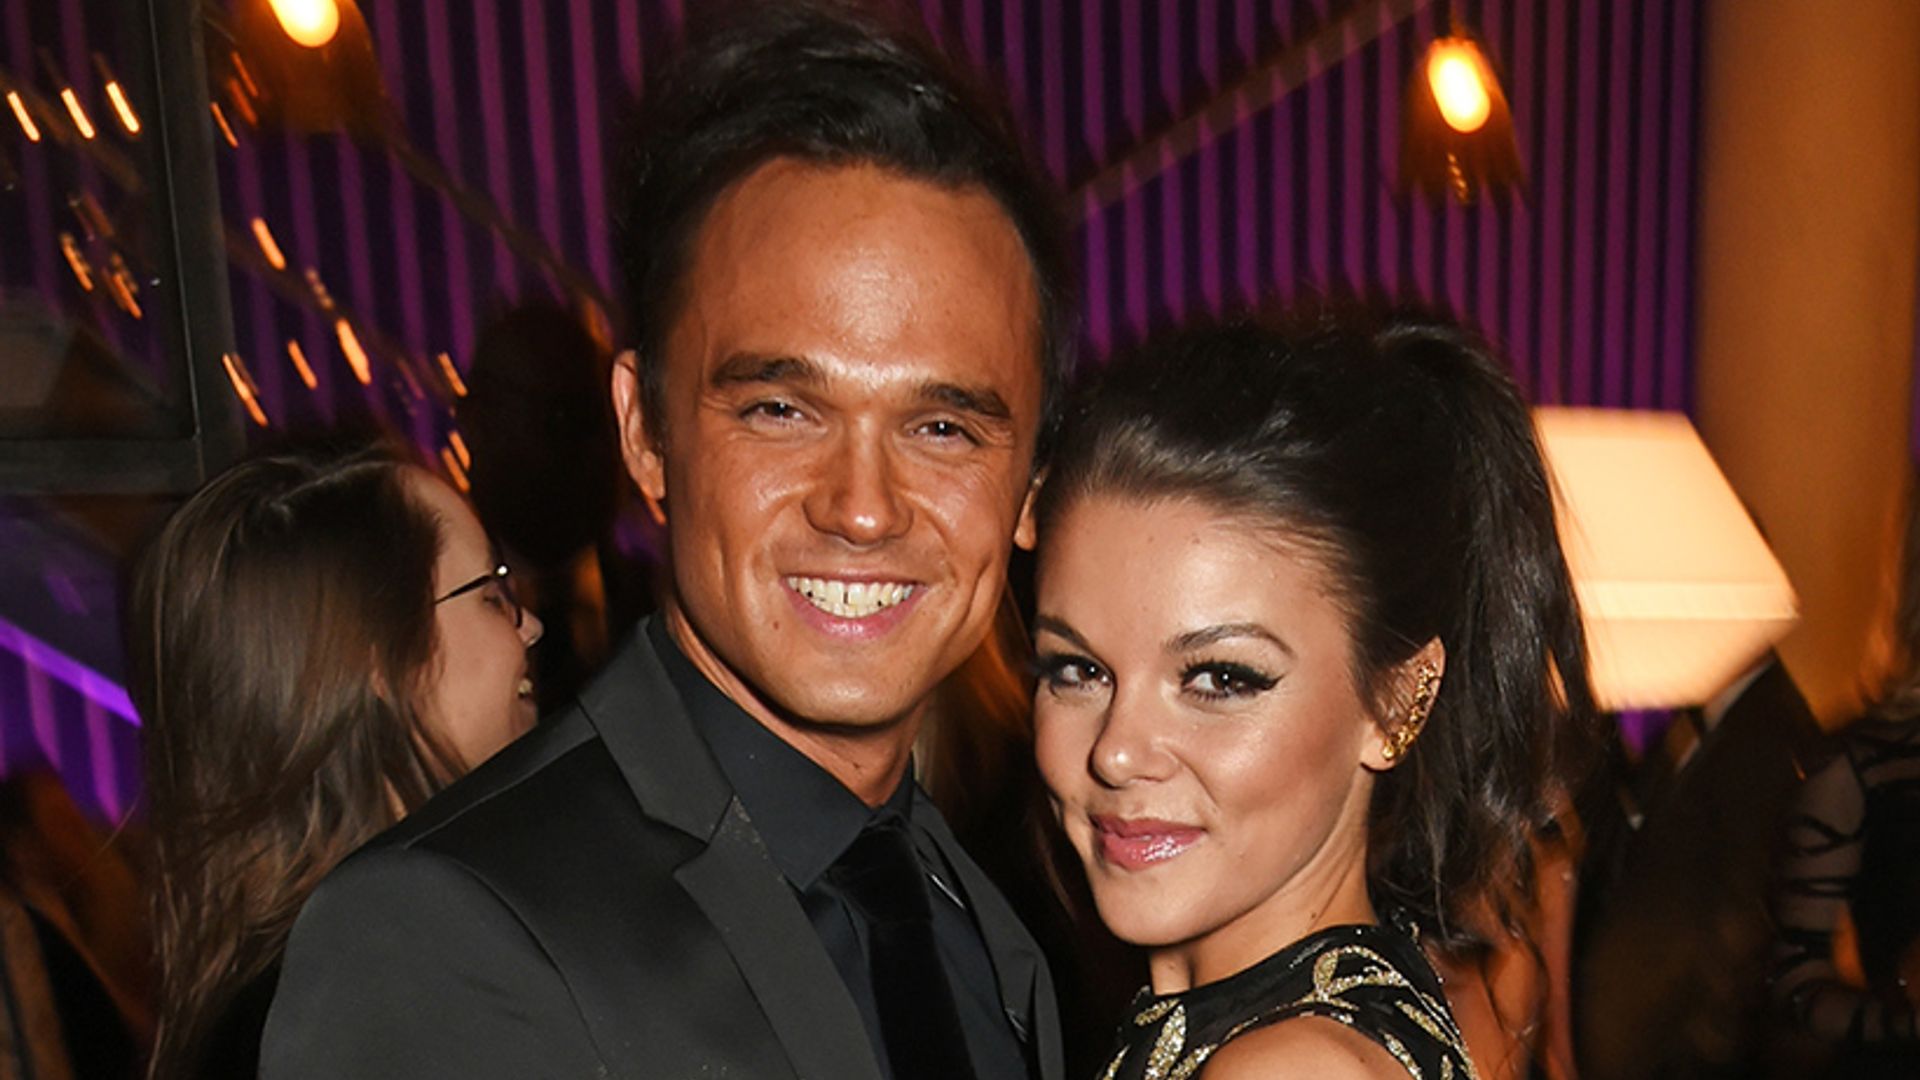 Gareth Gates 'engaged to girlfriend Faye Brookes' four months after split